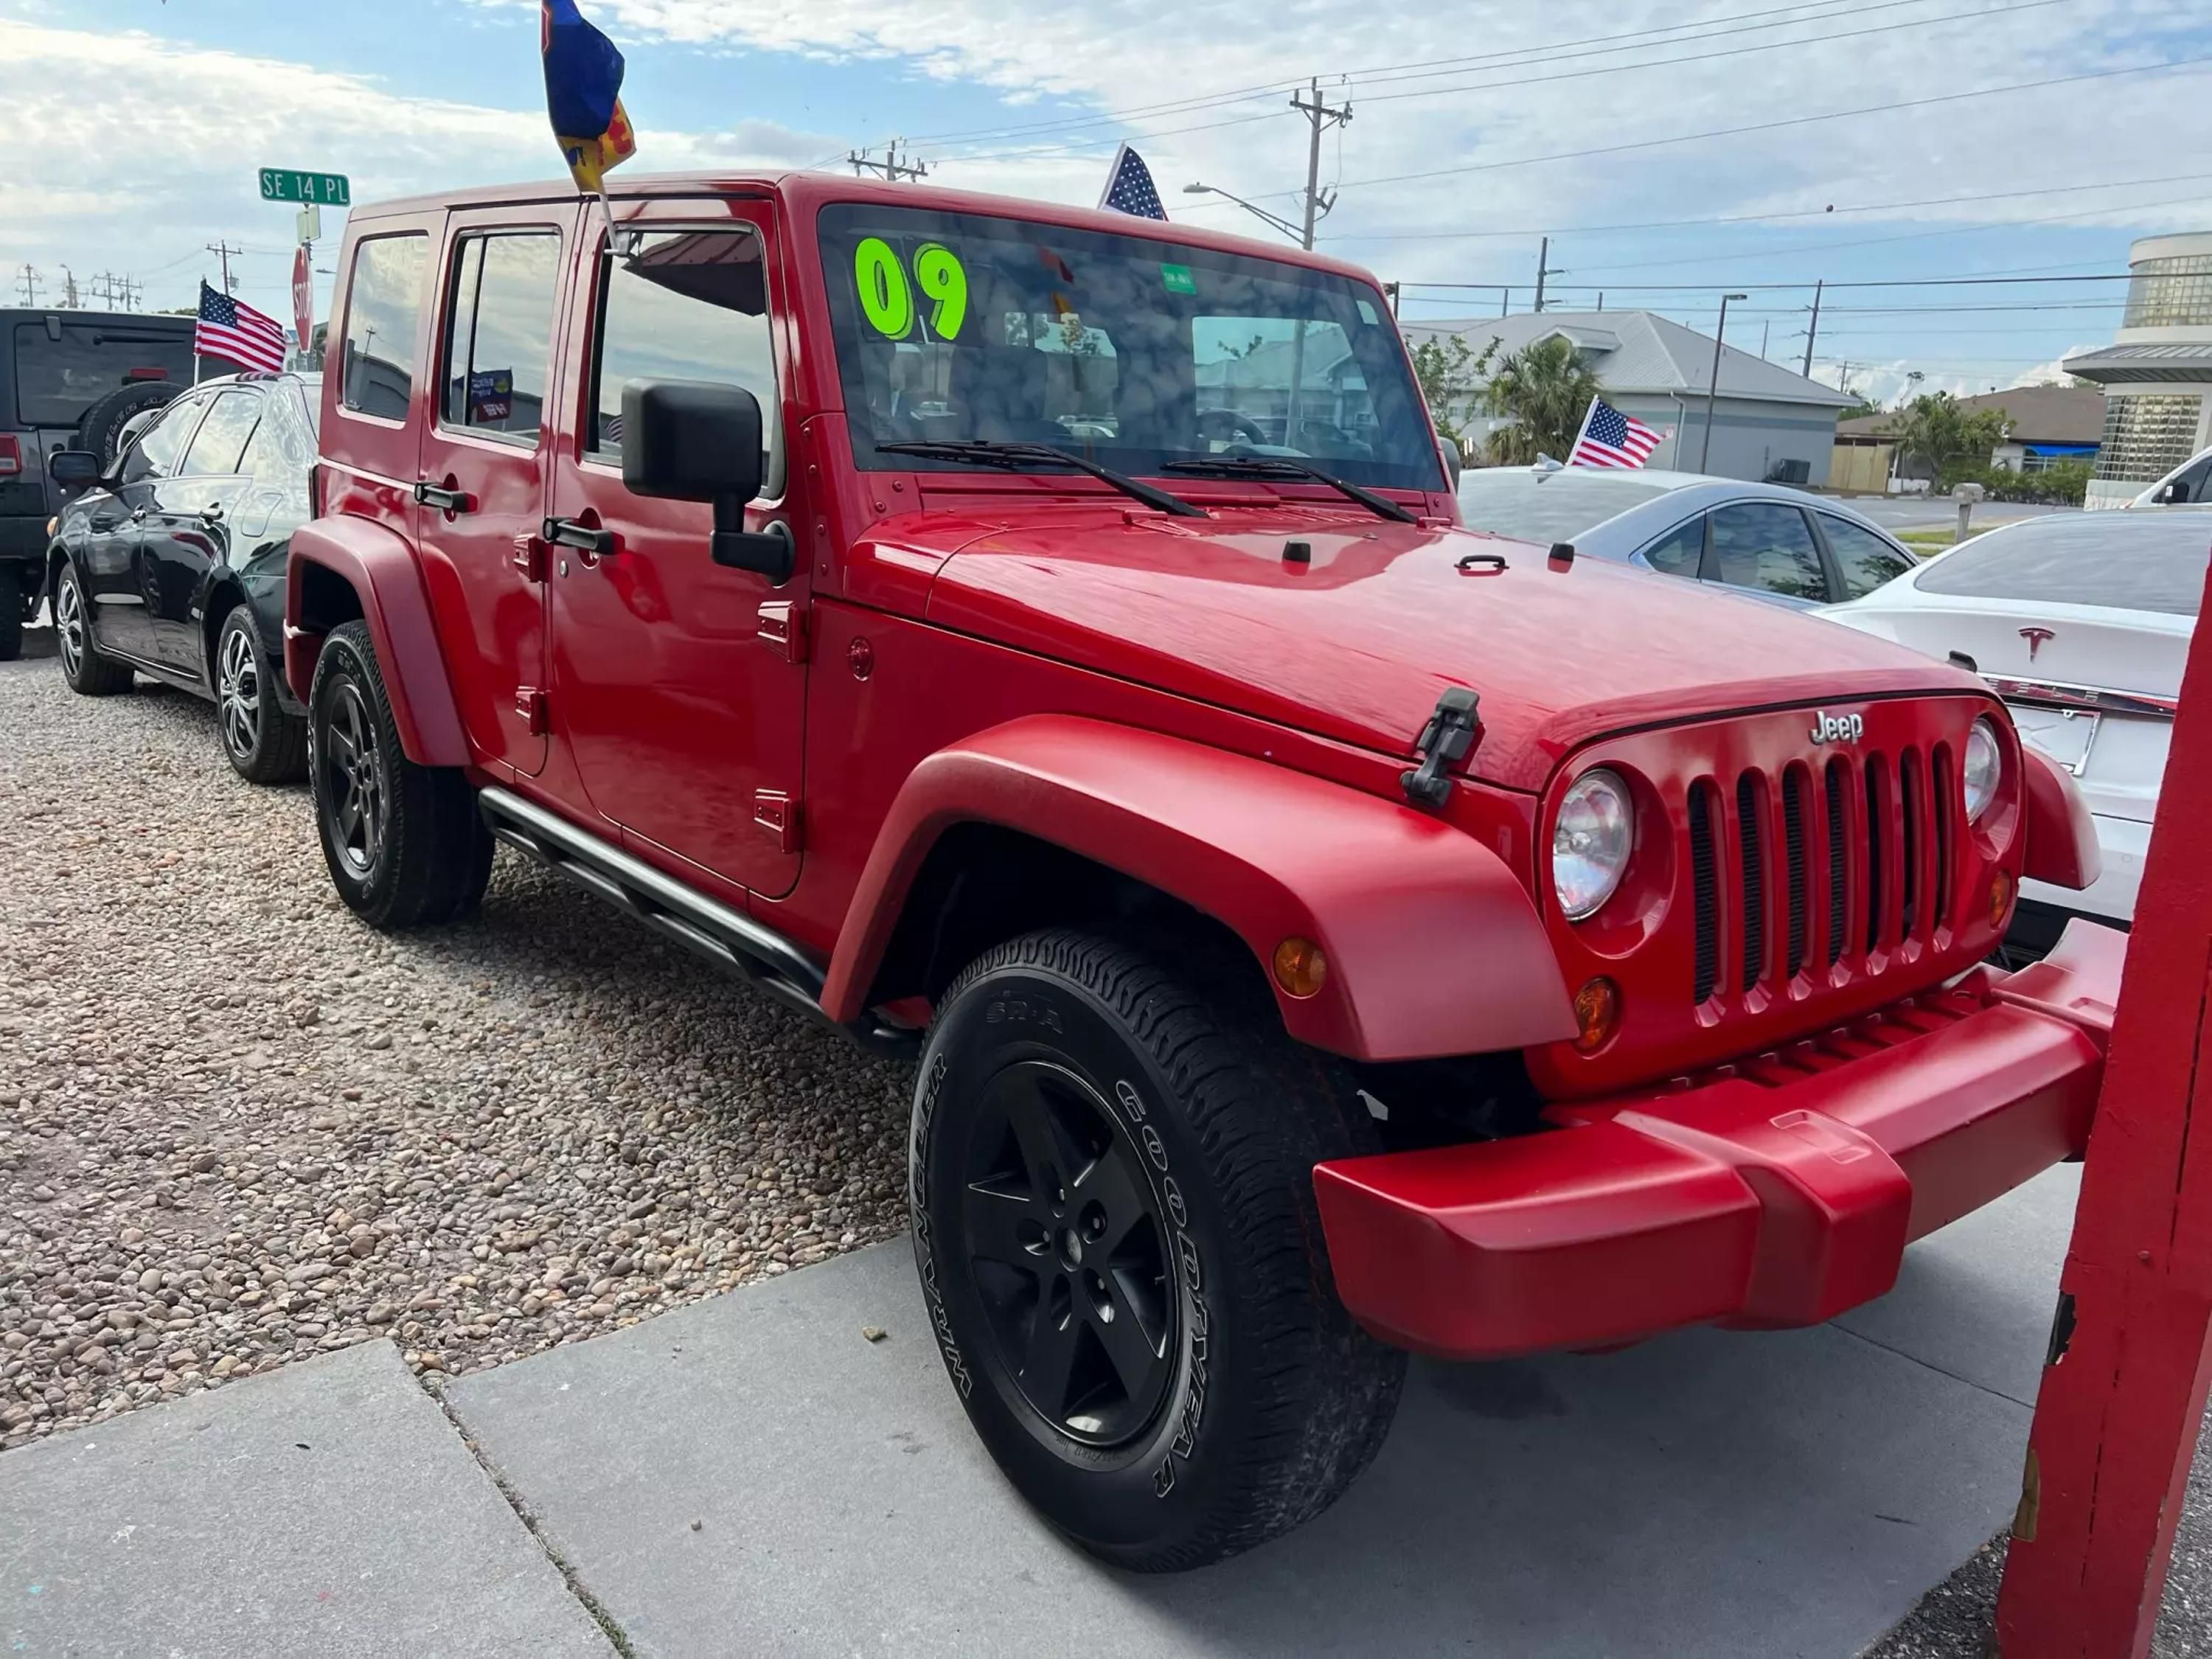 2009 Jeep Wrangler for Sale in Cape Coral, FL - OfferUp